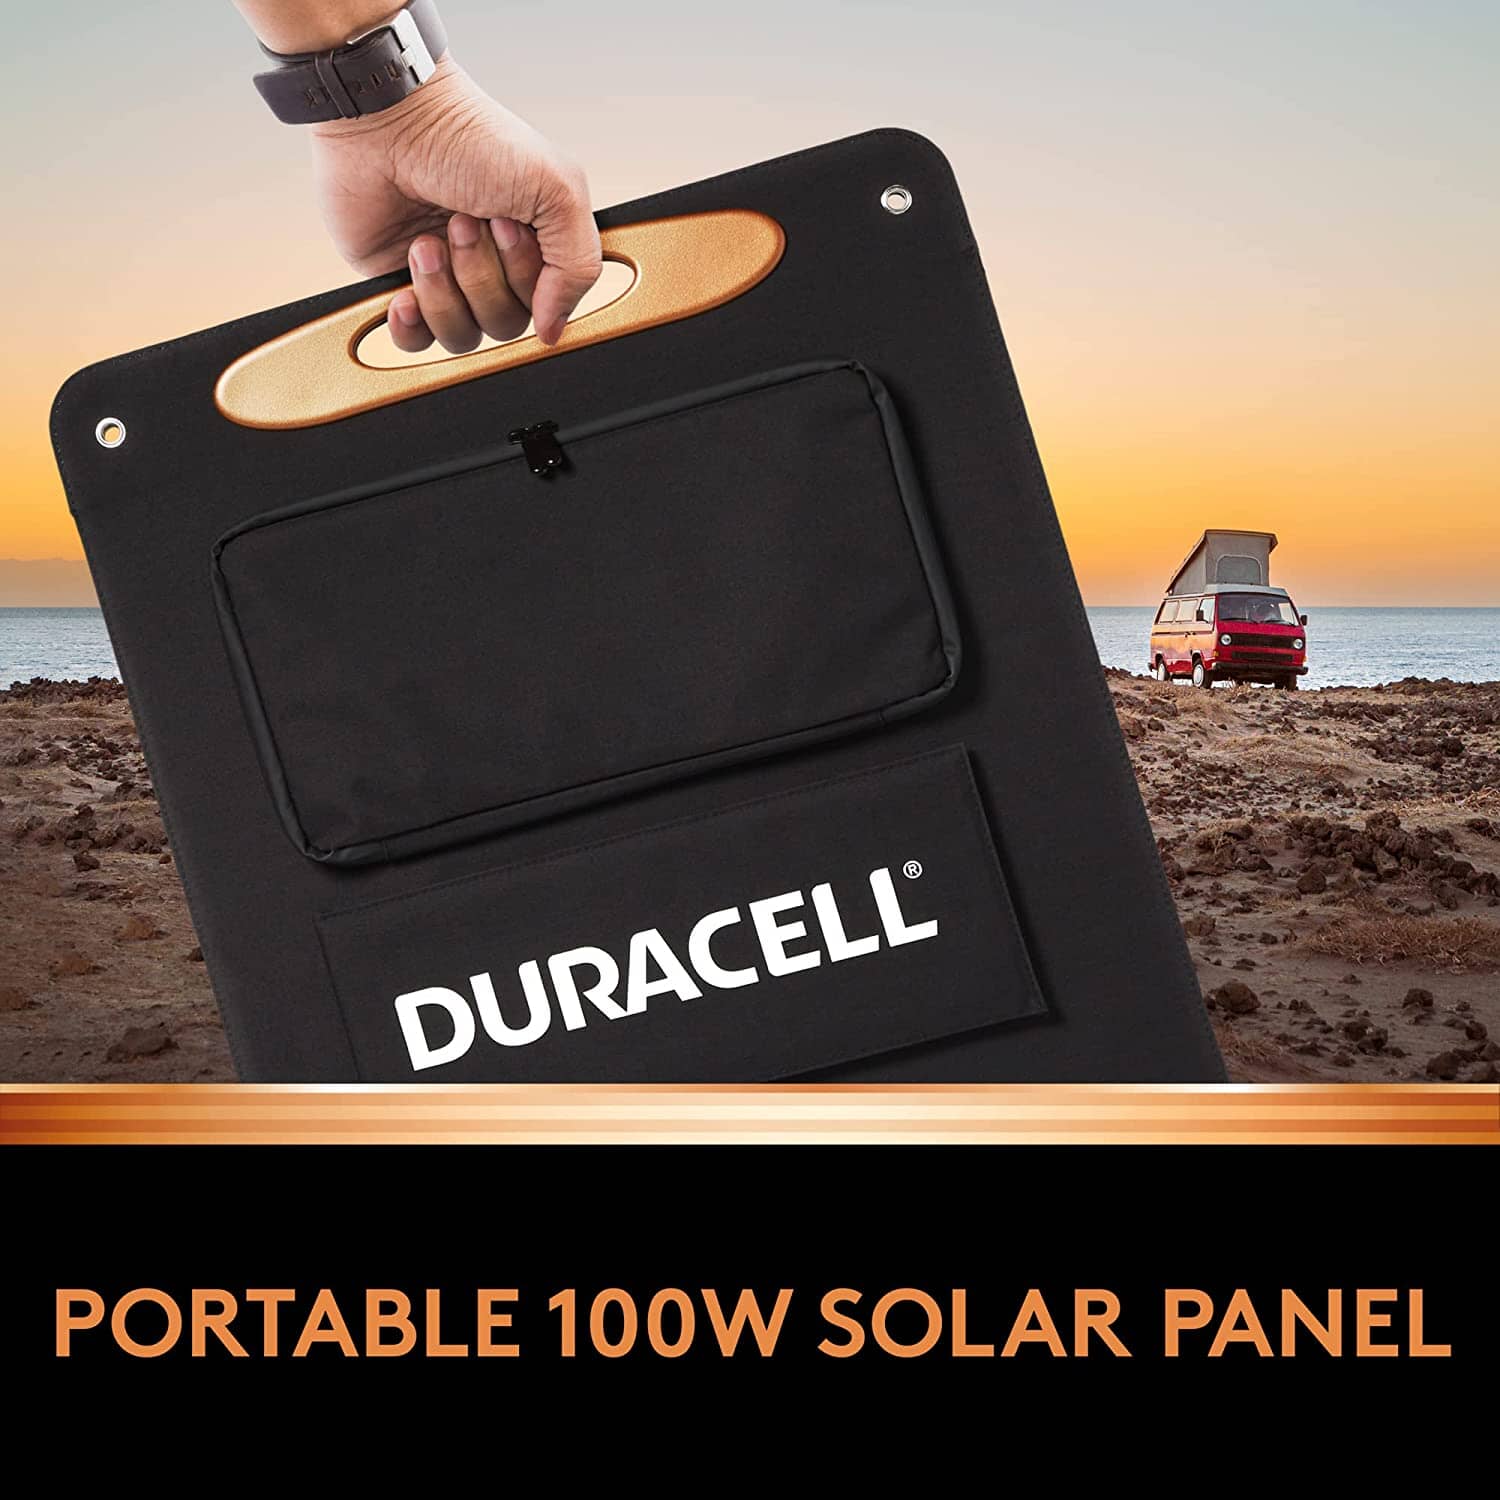 solar panel image in front of a sunset